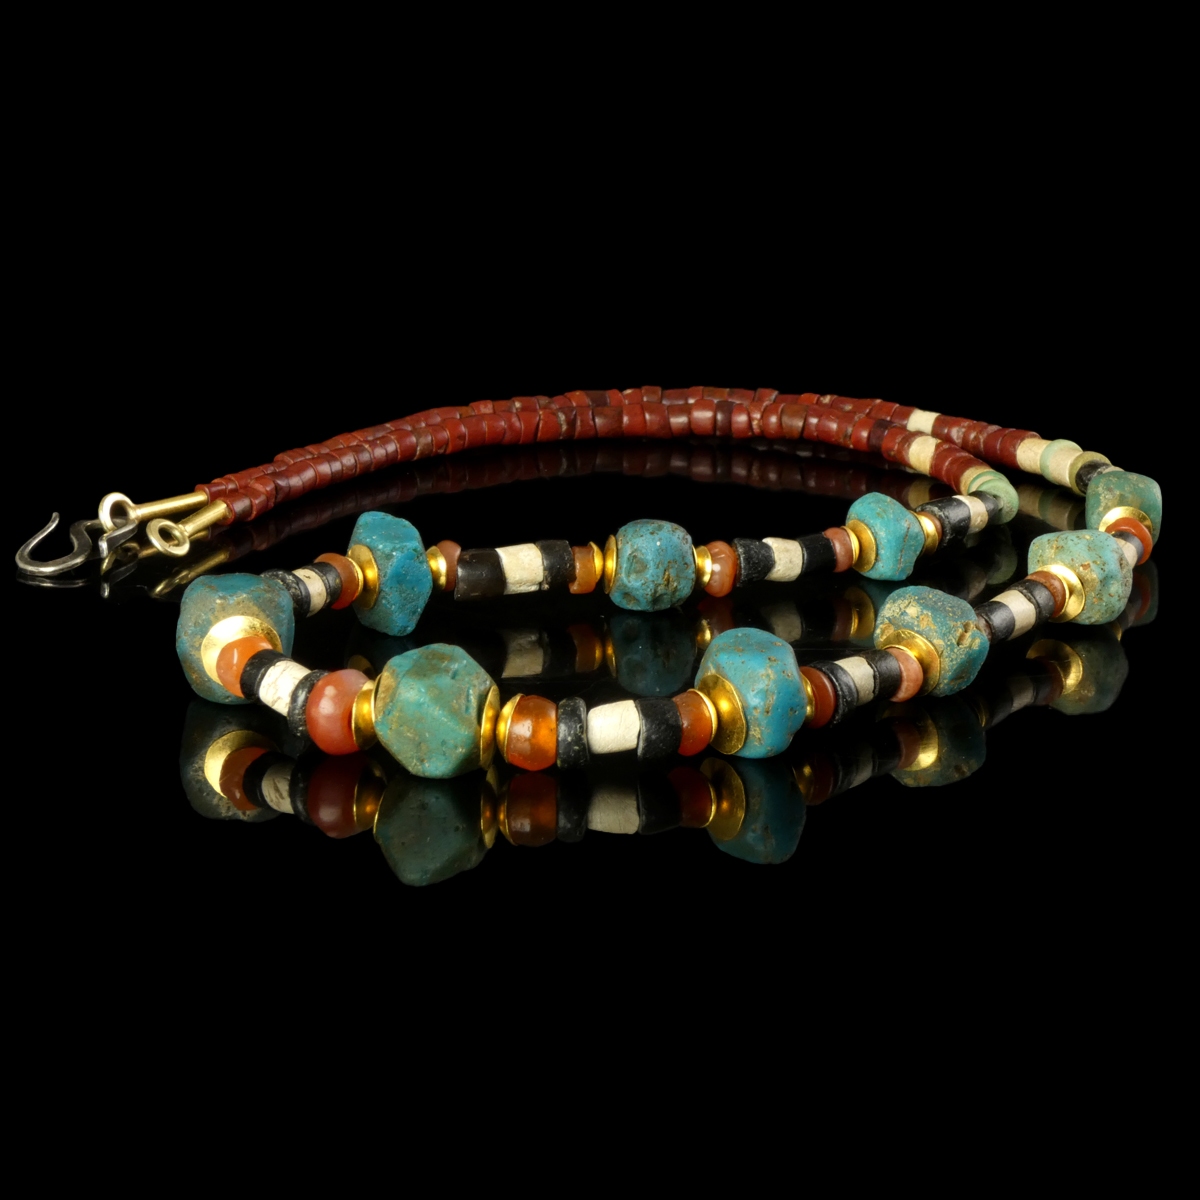 Necklace with Egyptian stone, glass and gold beads